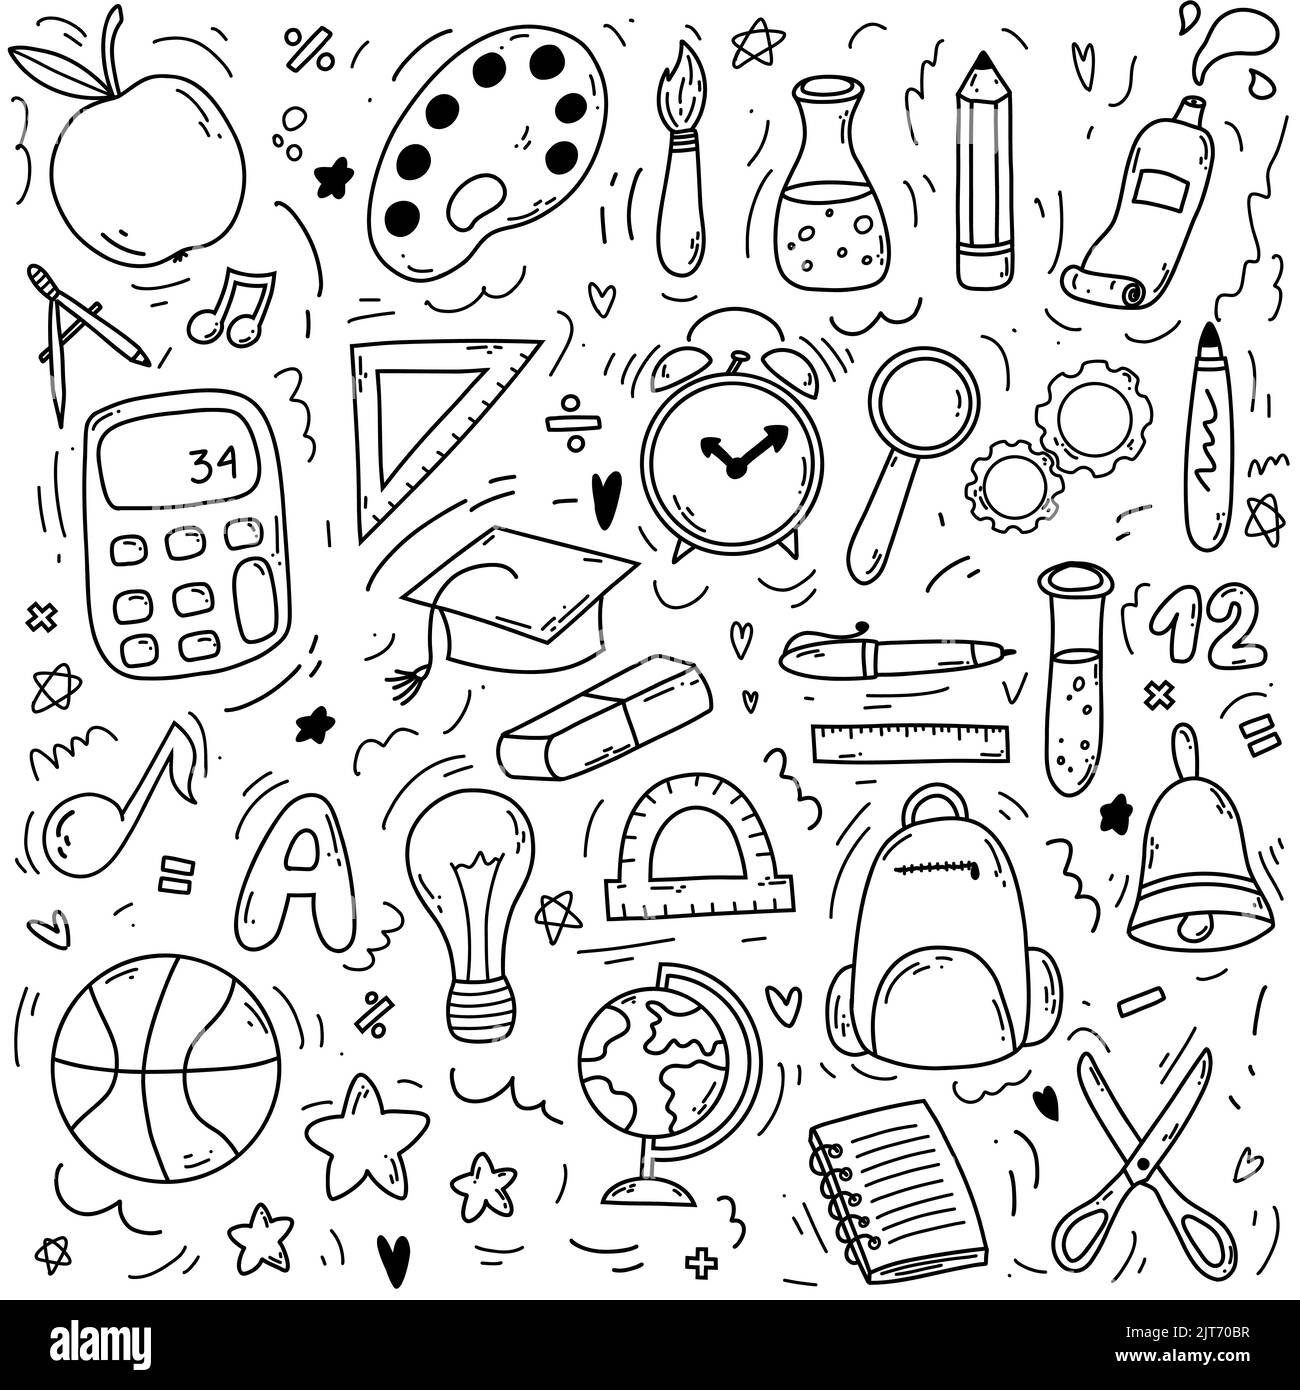 Premium Vector  Hand drawn set of artist tools doodle art supplies in  sketch style easel brushes paint pencils